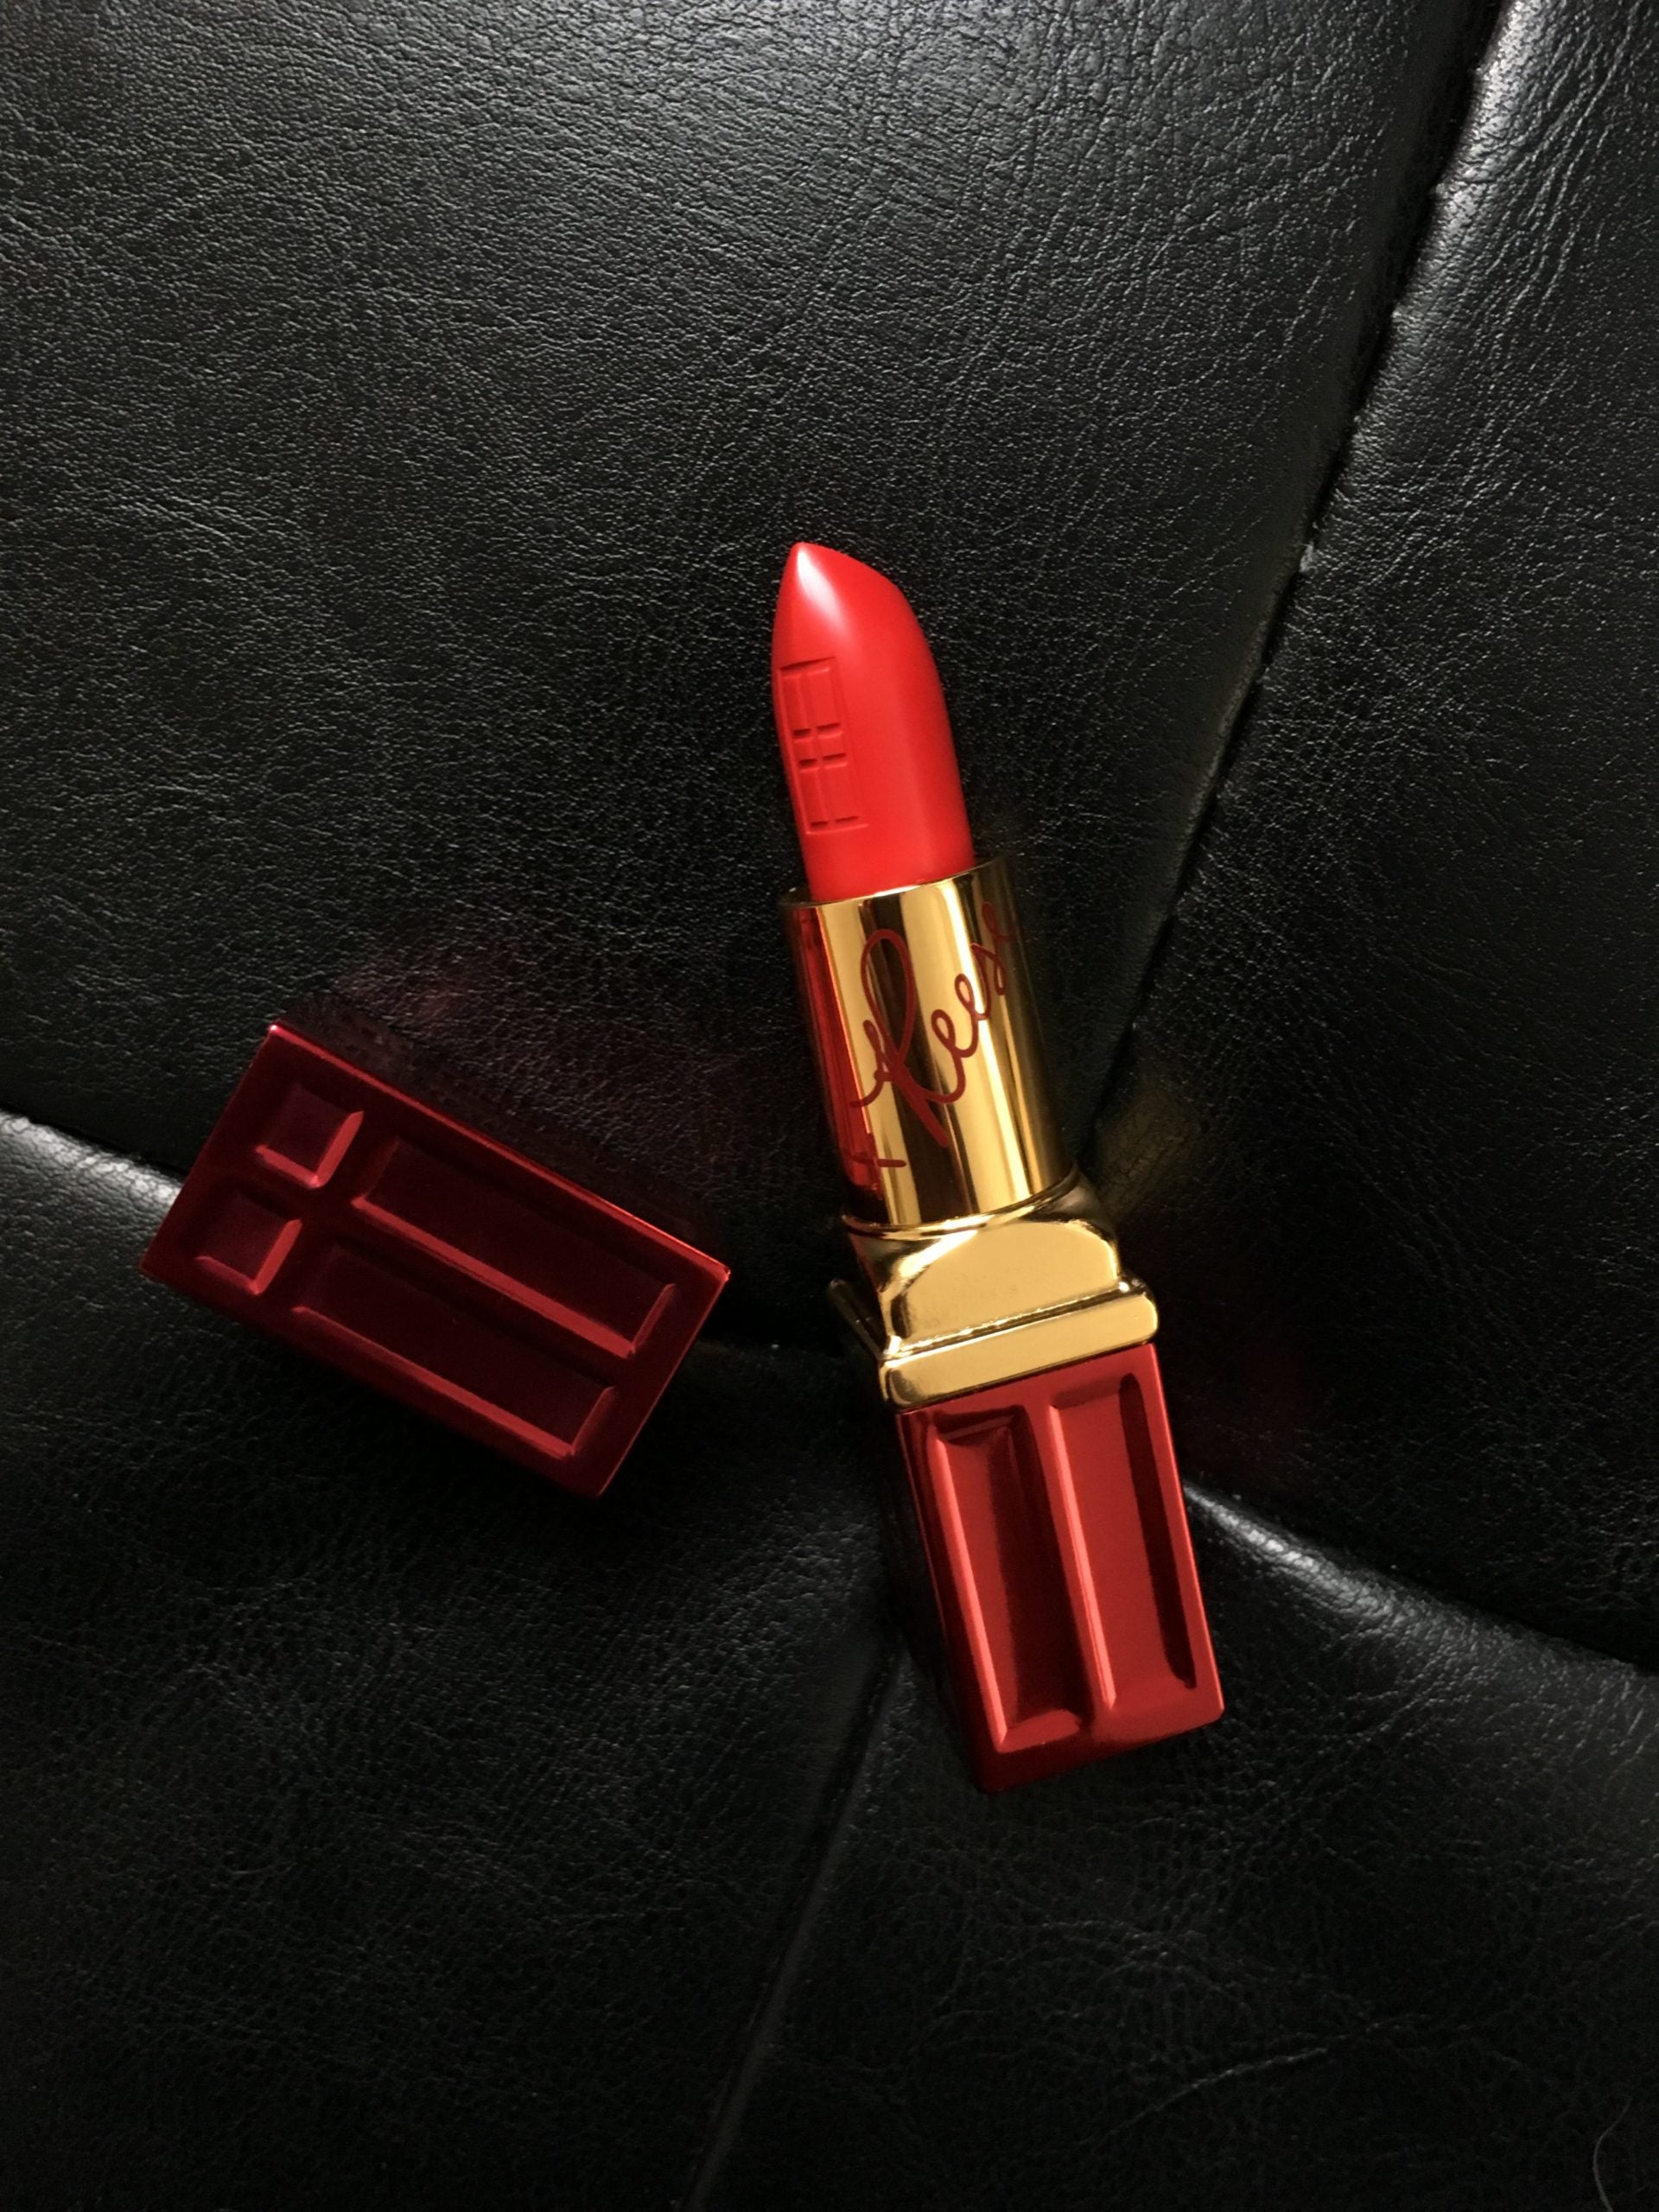 Review, Swatches, Photos, Makeup Trends 2018, 2019, 2020: Best Red Lipstick, Elizabeth Arden, Reese Witherspoon, Limited Edition Red Door Red Moisturizing Lipstick